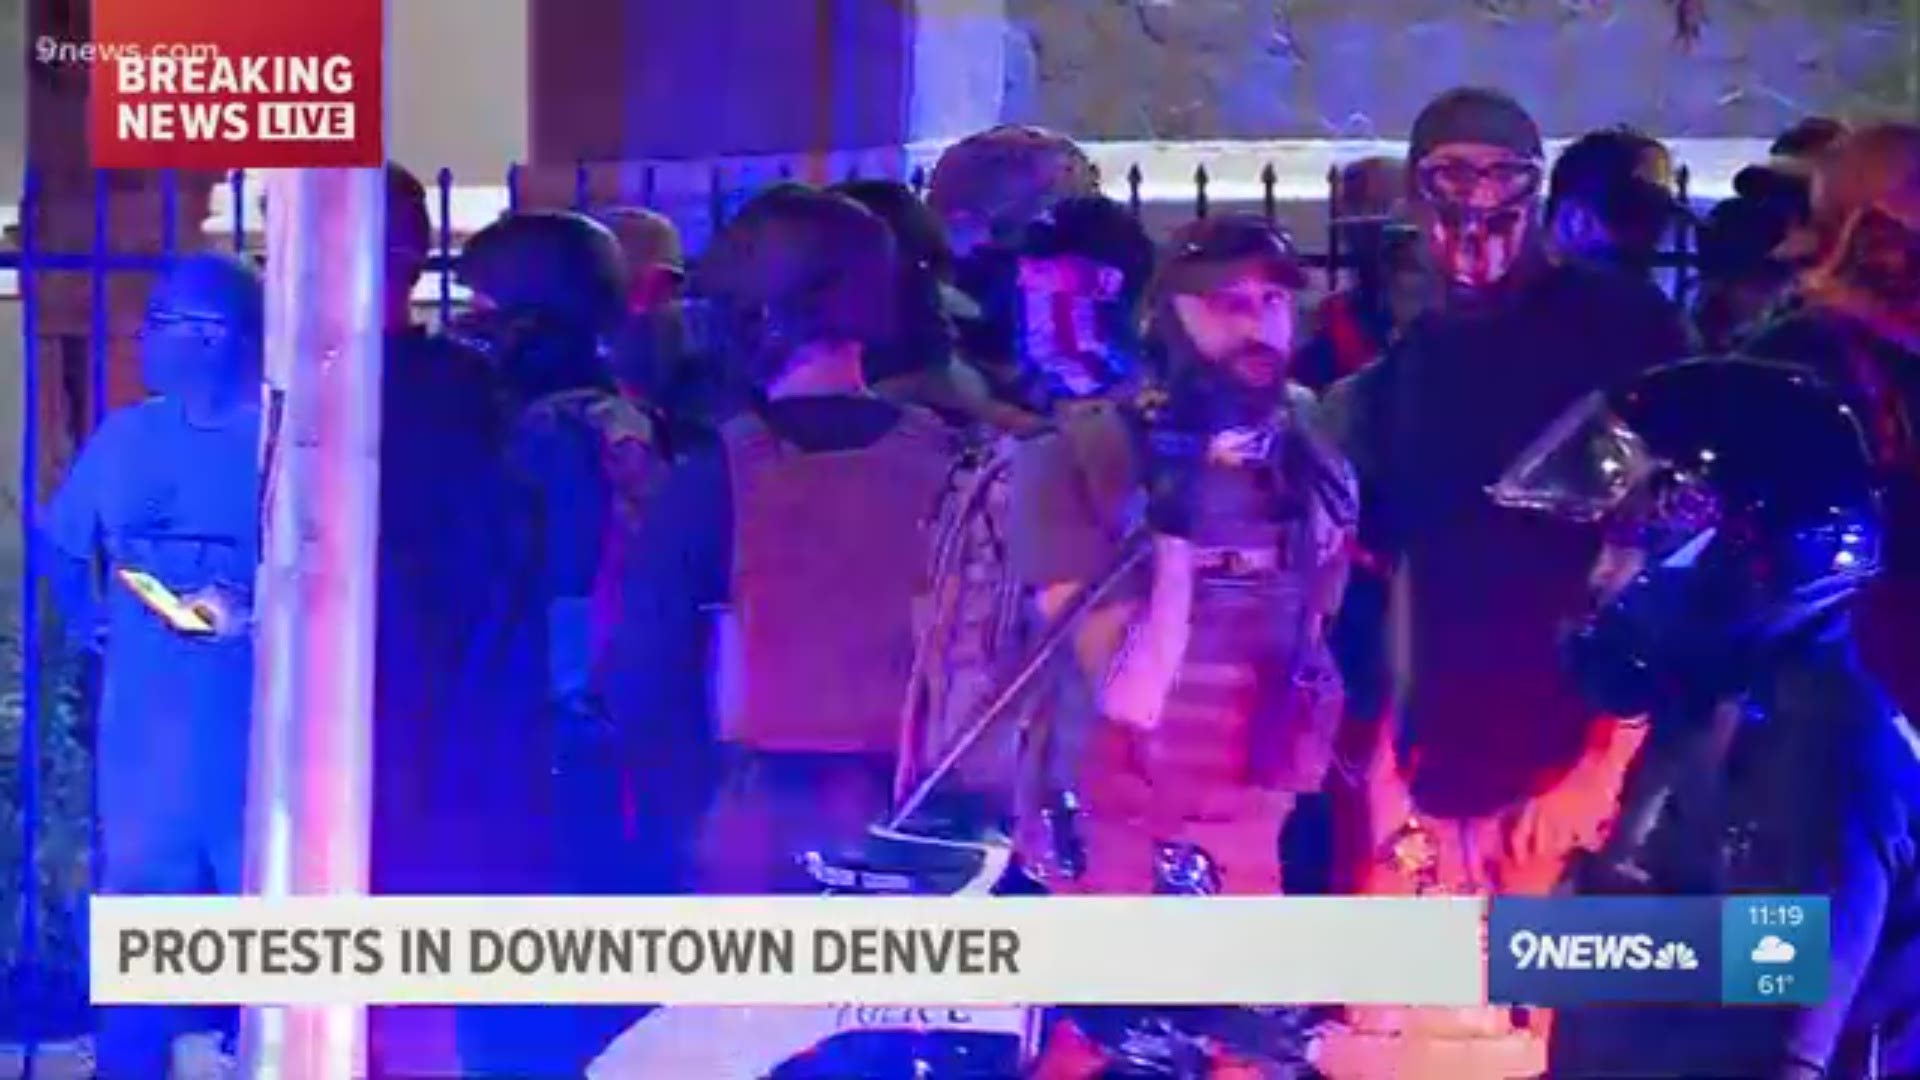 A right-wing group had said they intended to come to a planned protest in Denver Friday night.